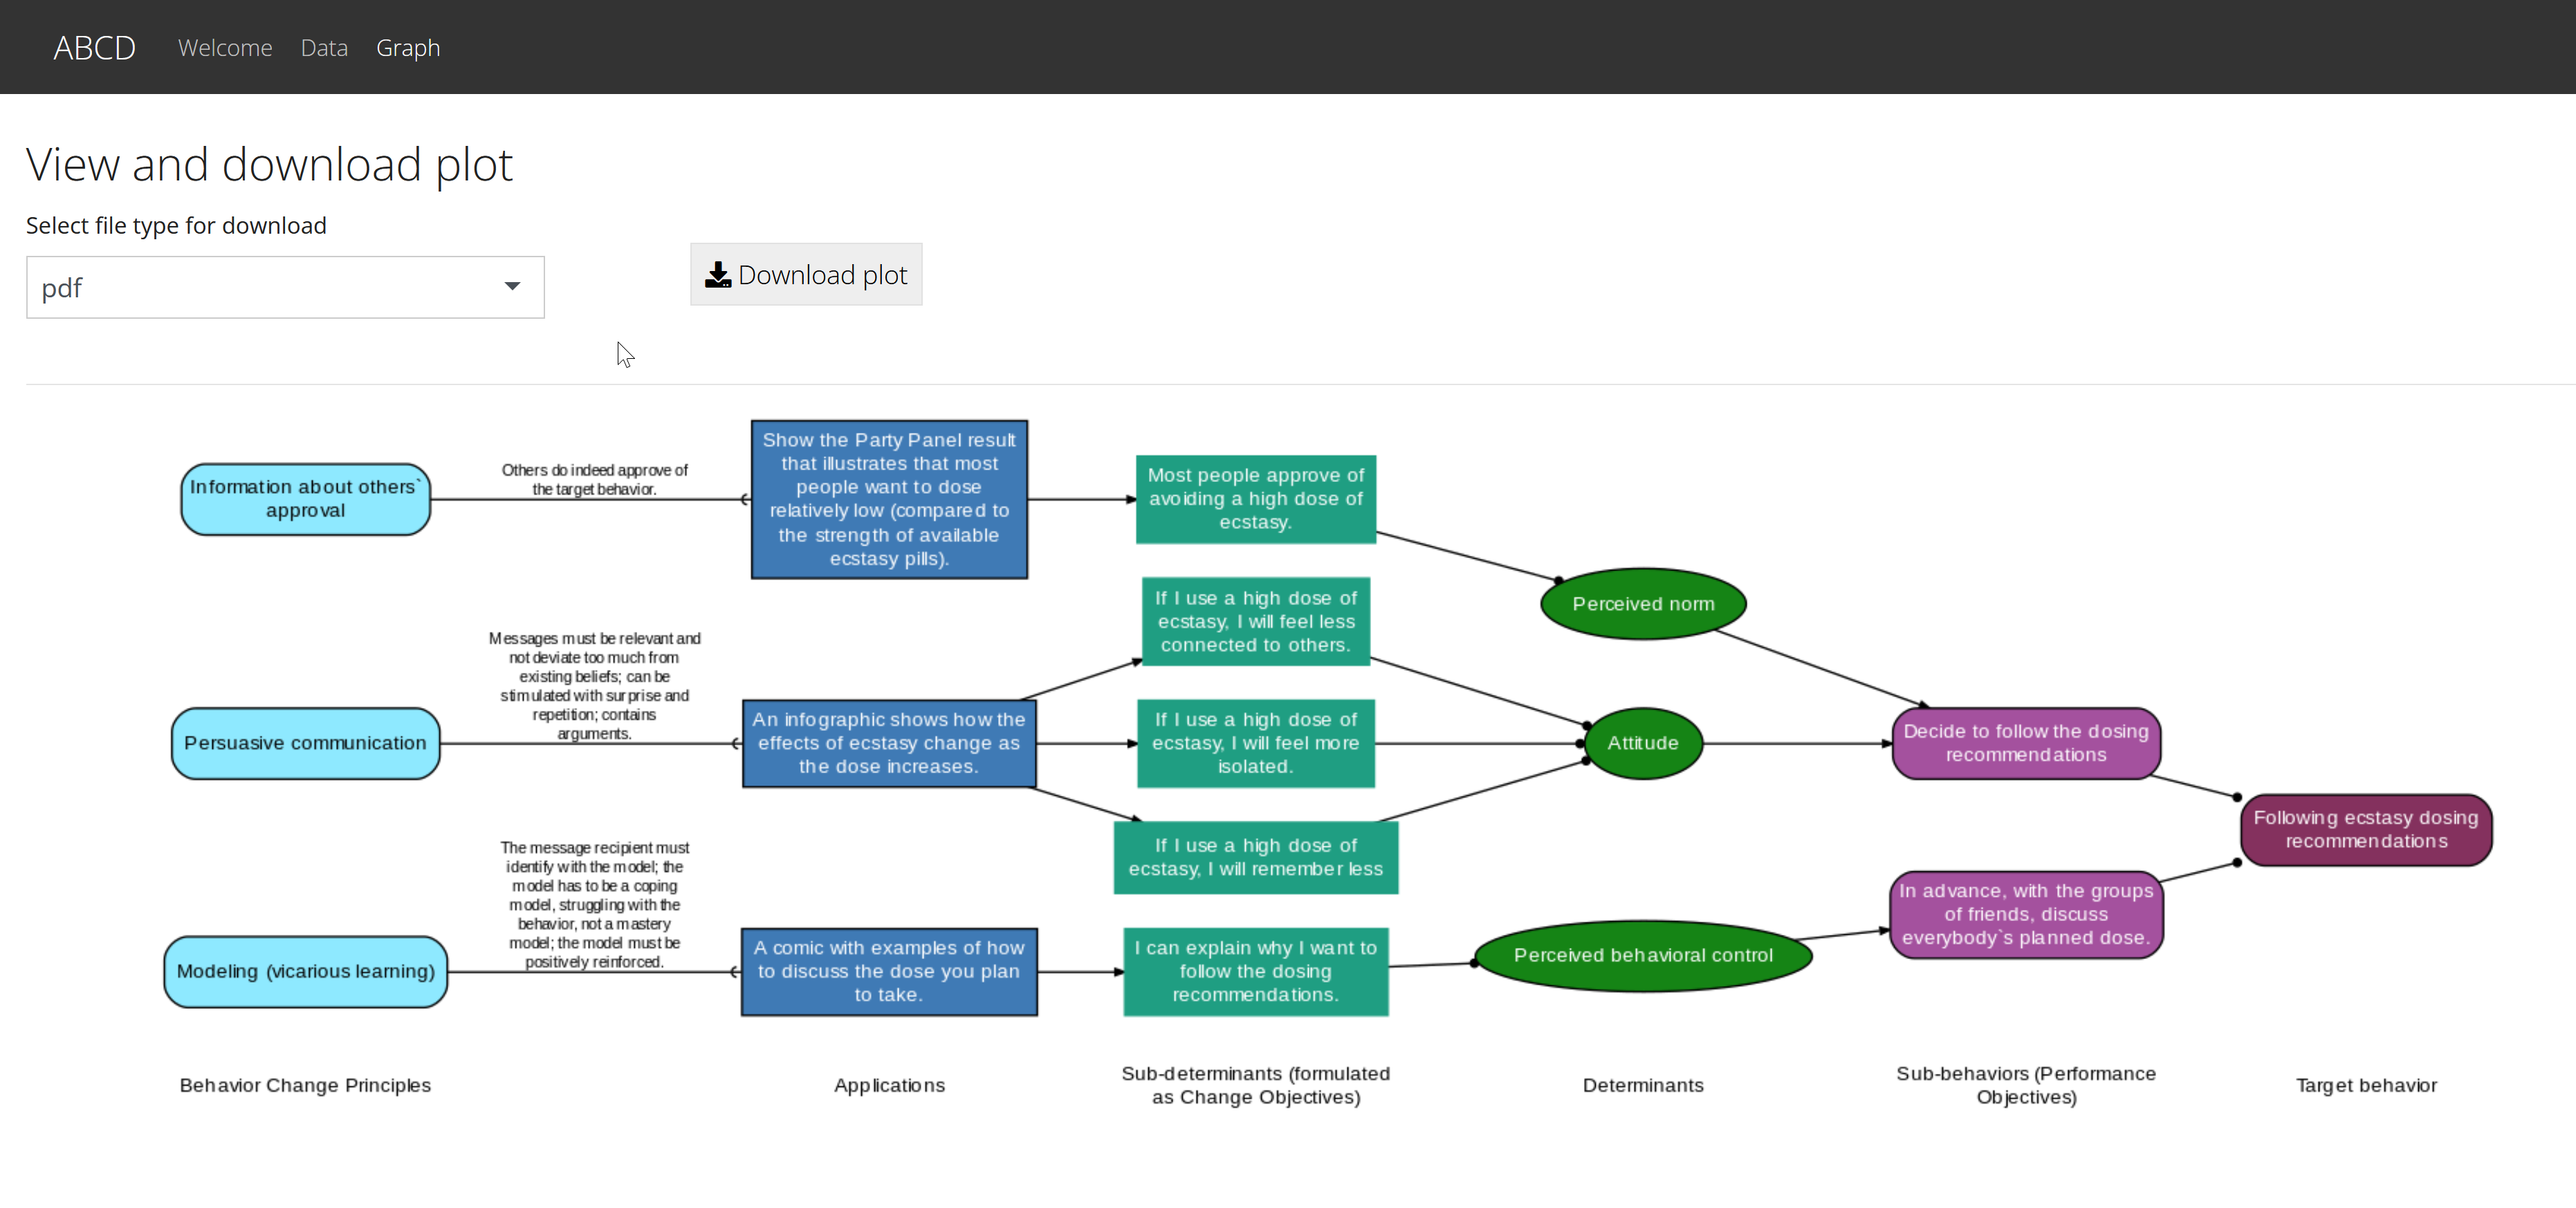 A screenshot of the ABCD Shiny App showing an Acyclic Behavior Change Diagram that was just created.